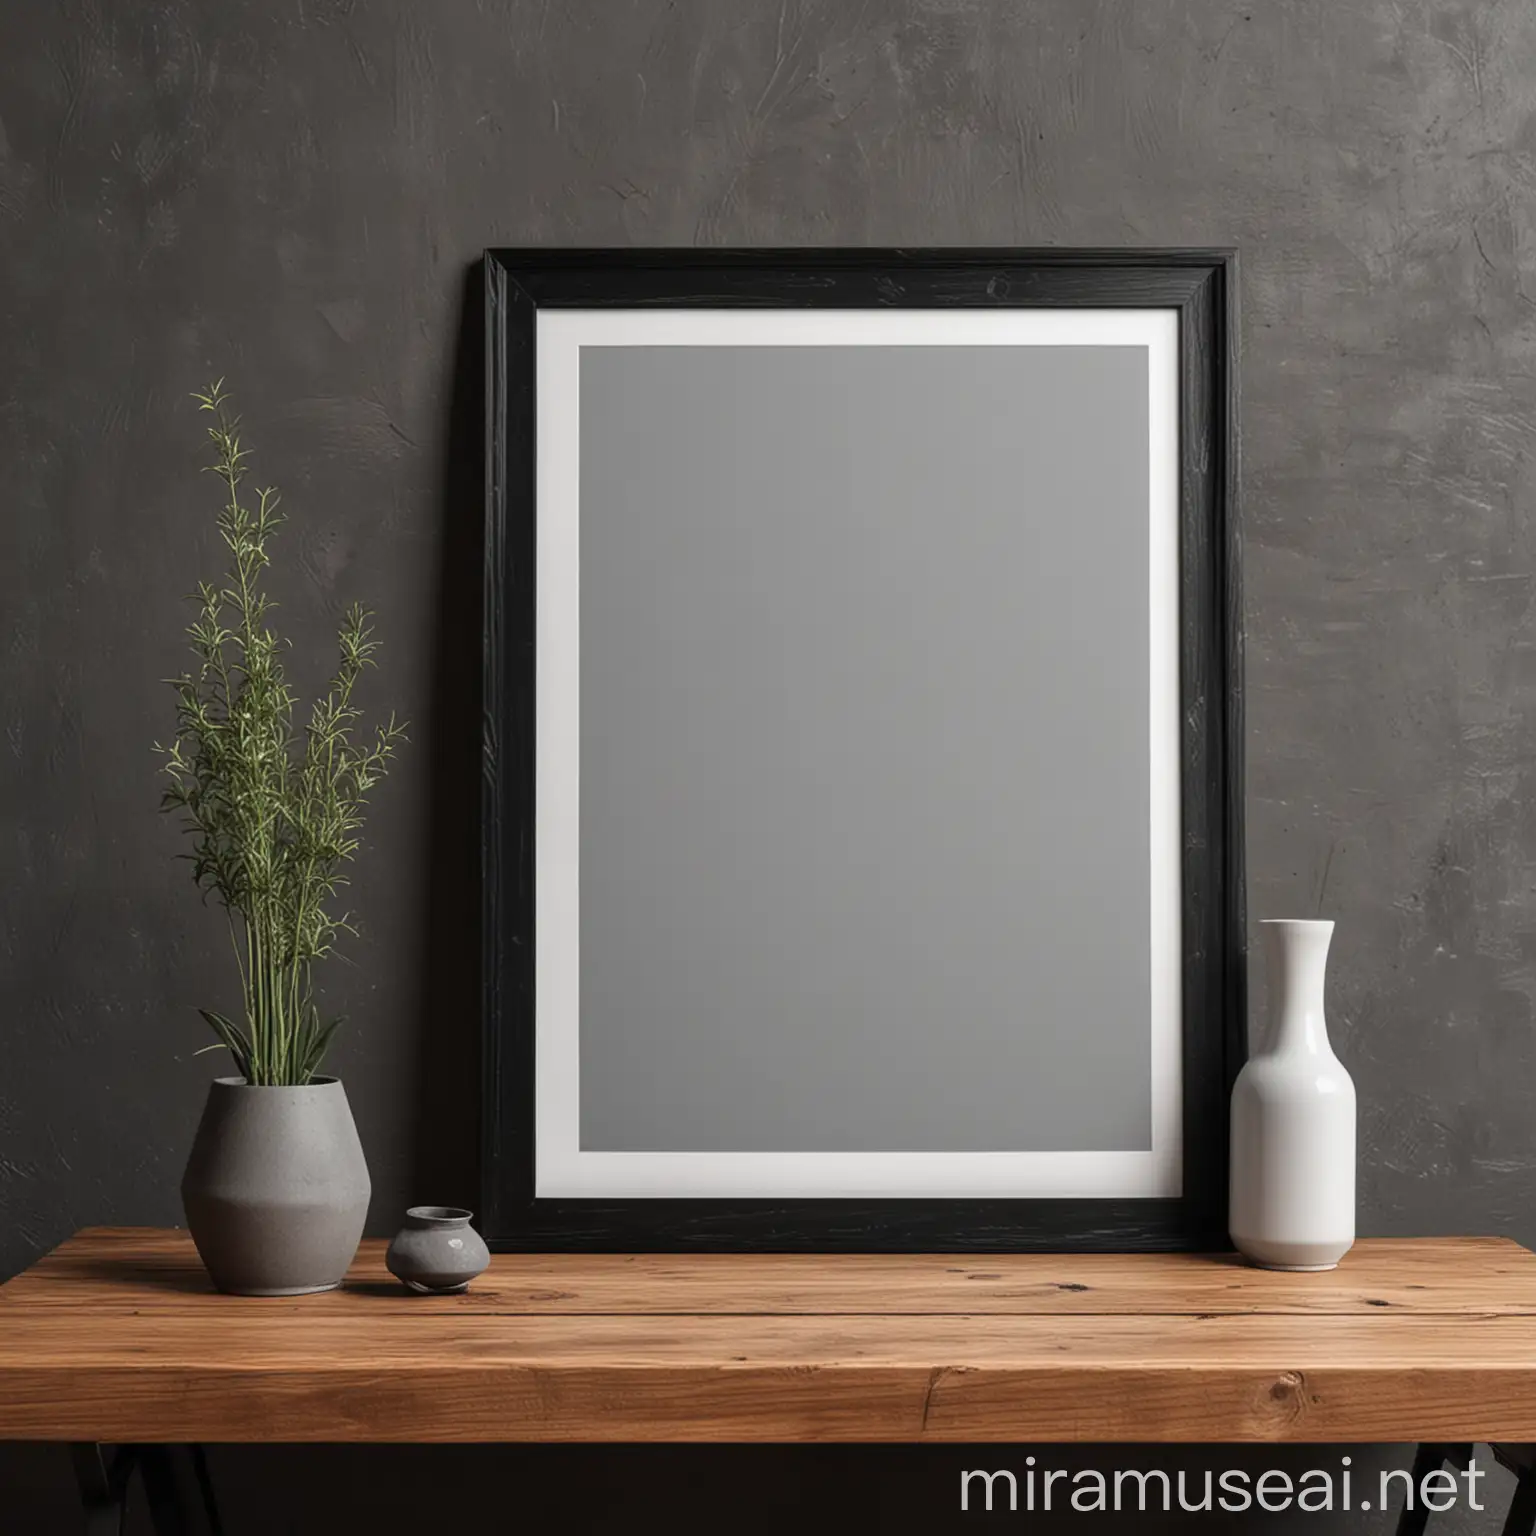 A4 black frame frontal mockup on a wooden desk and a dark grey wall behind the frame